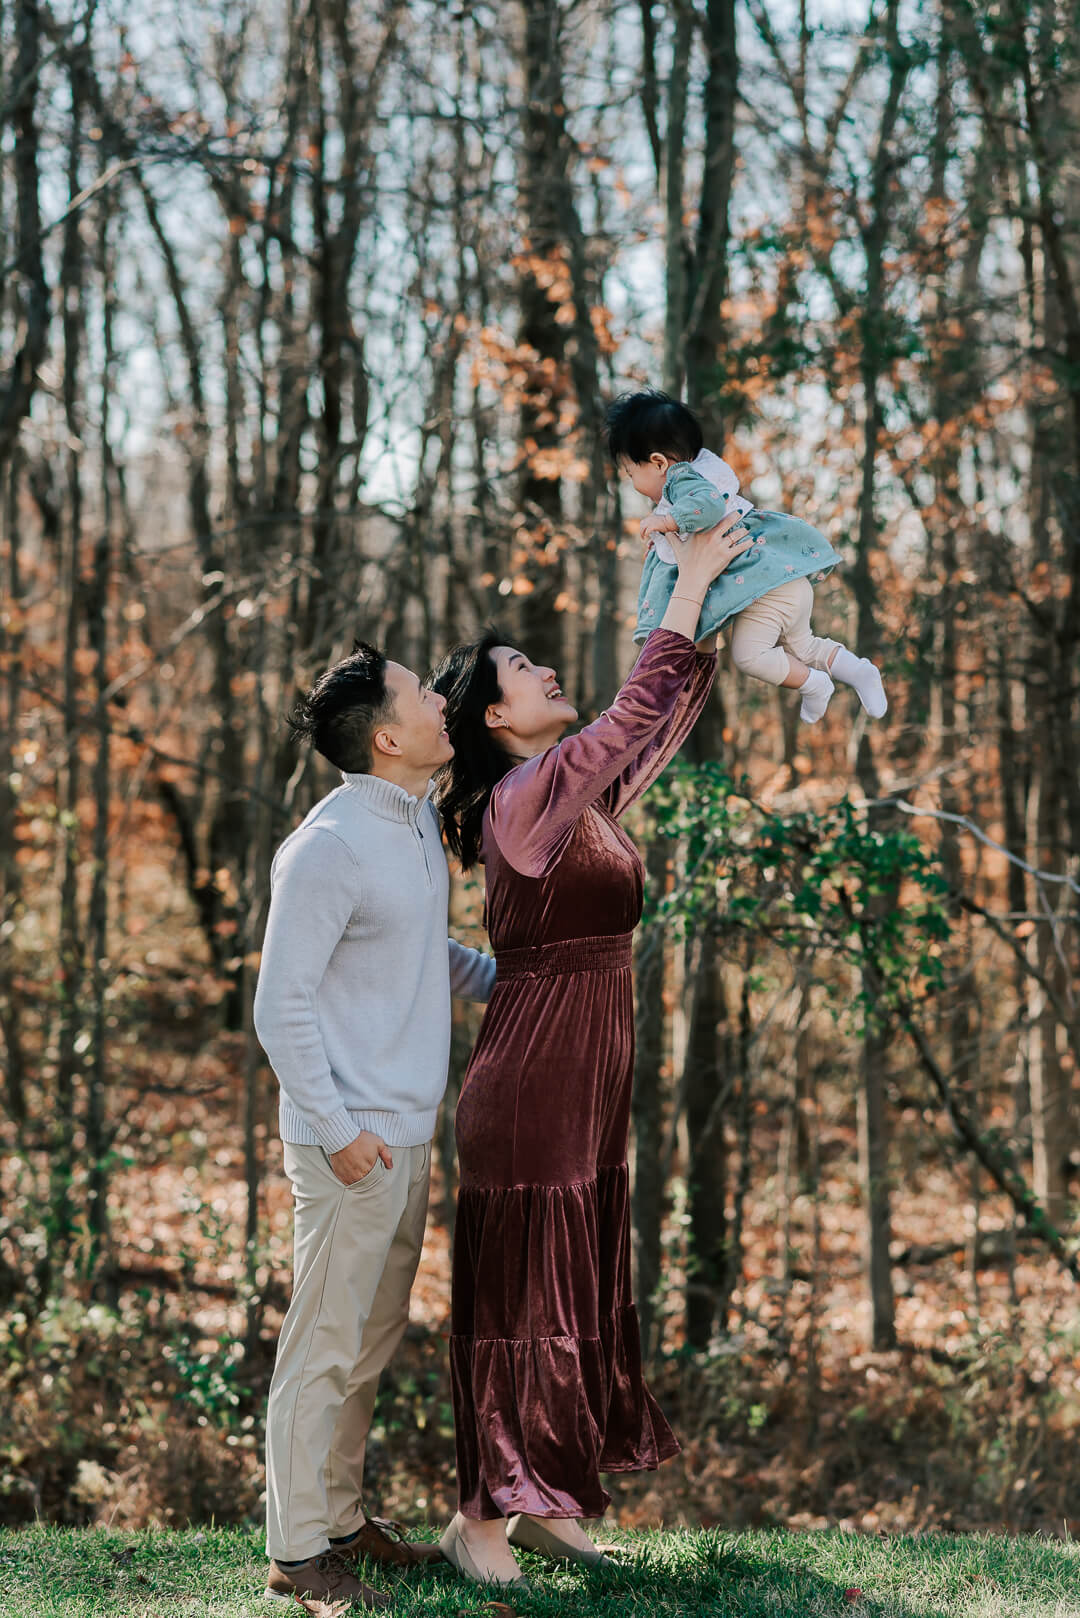 A mother in a velvet dress lifts her toddler way over her head with dad looking on in a park after some baby music classes northern virginia